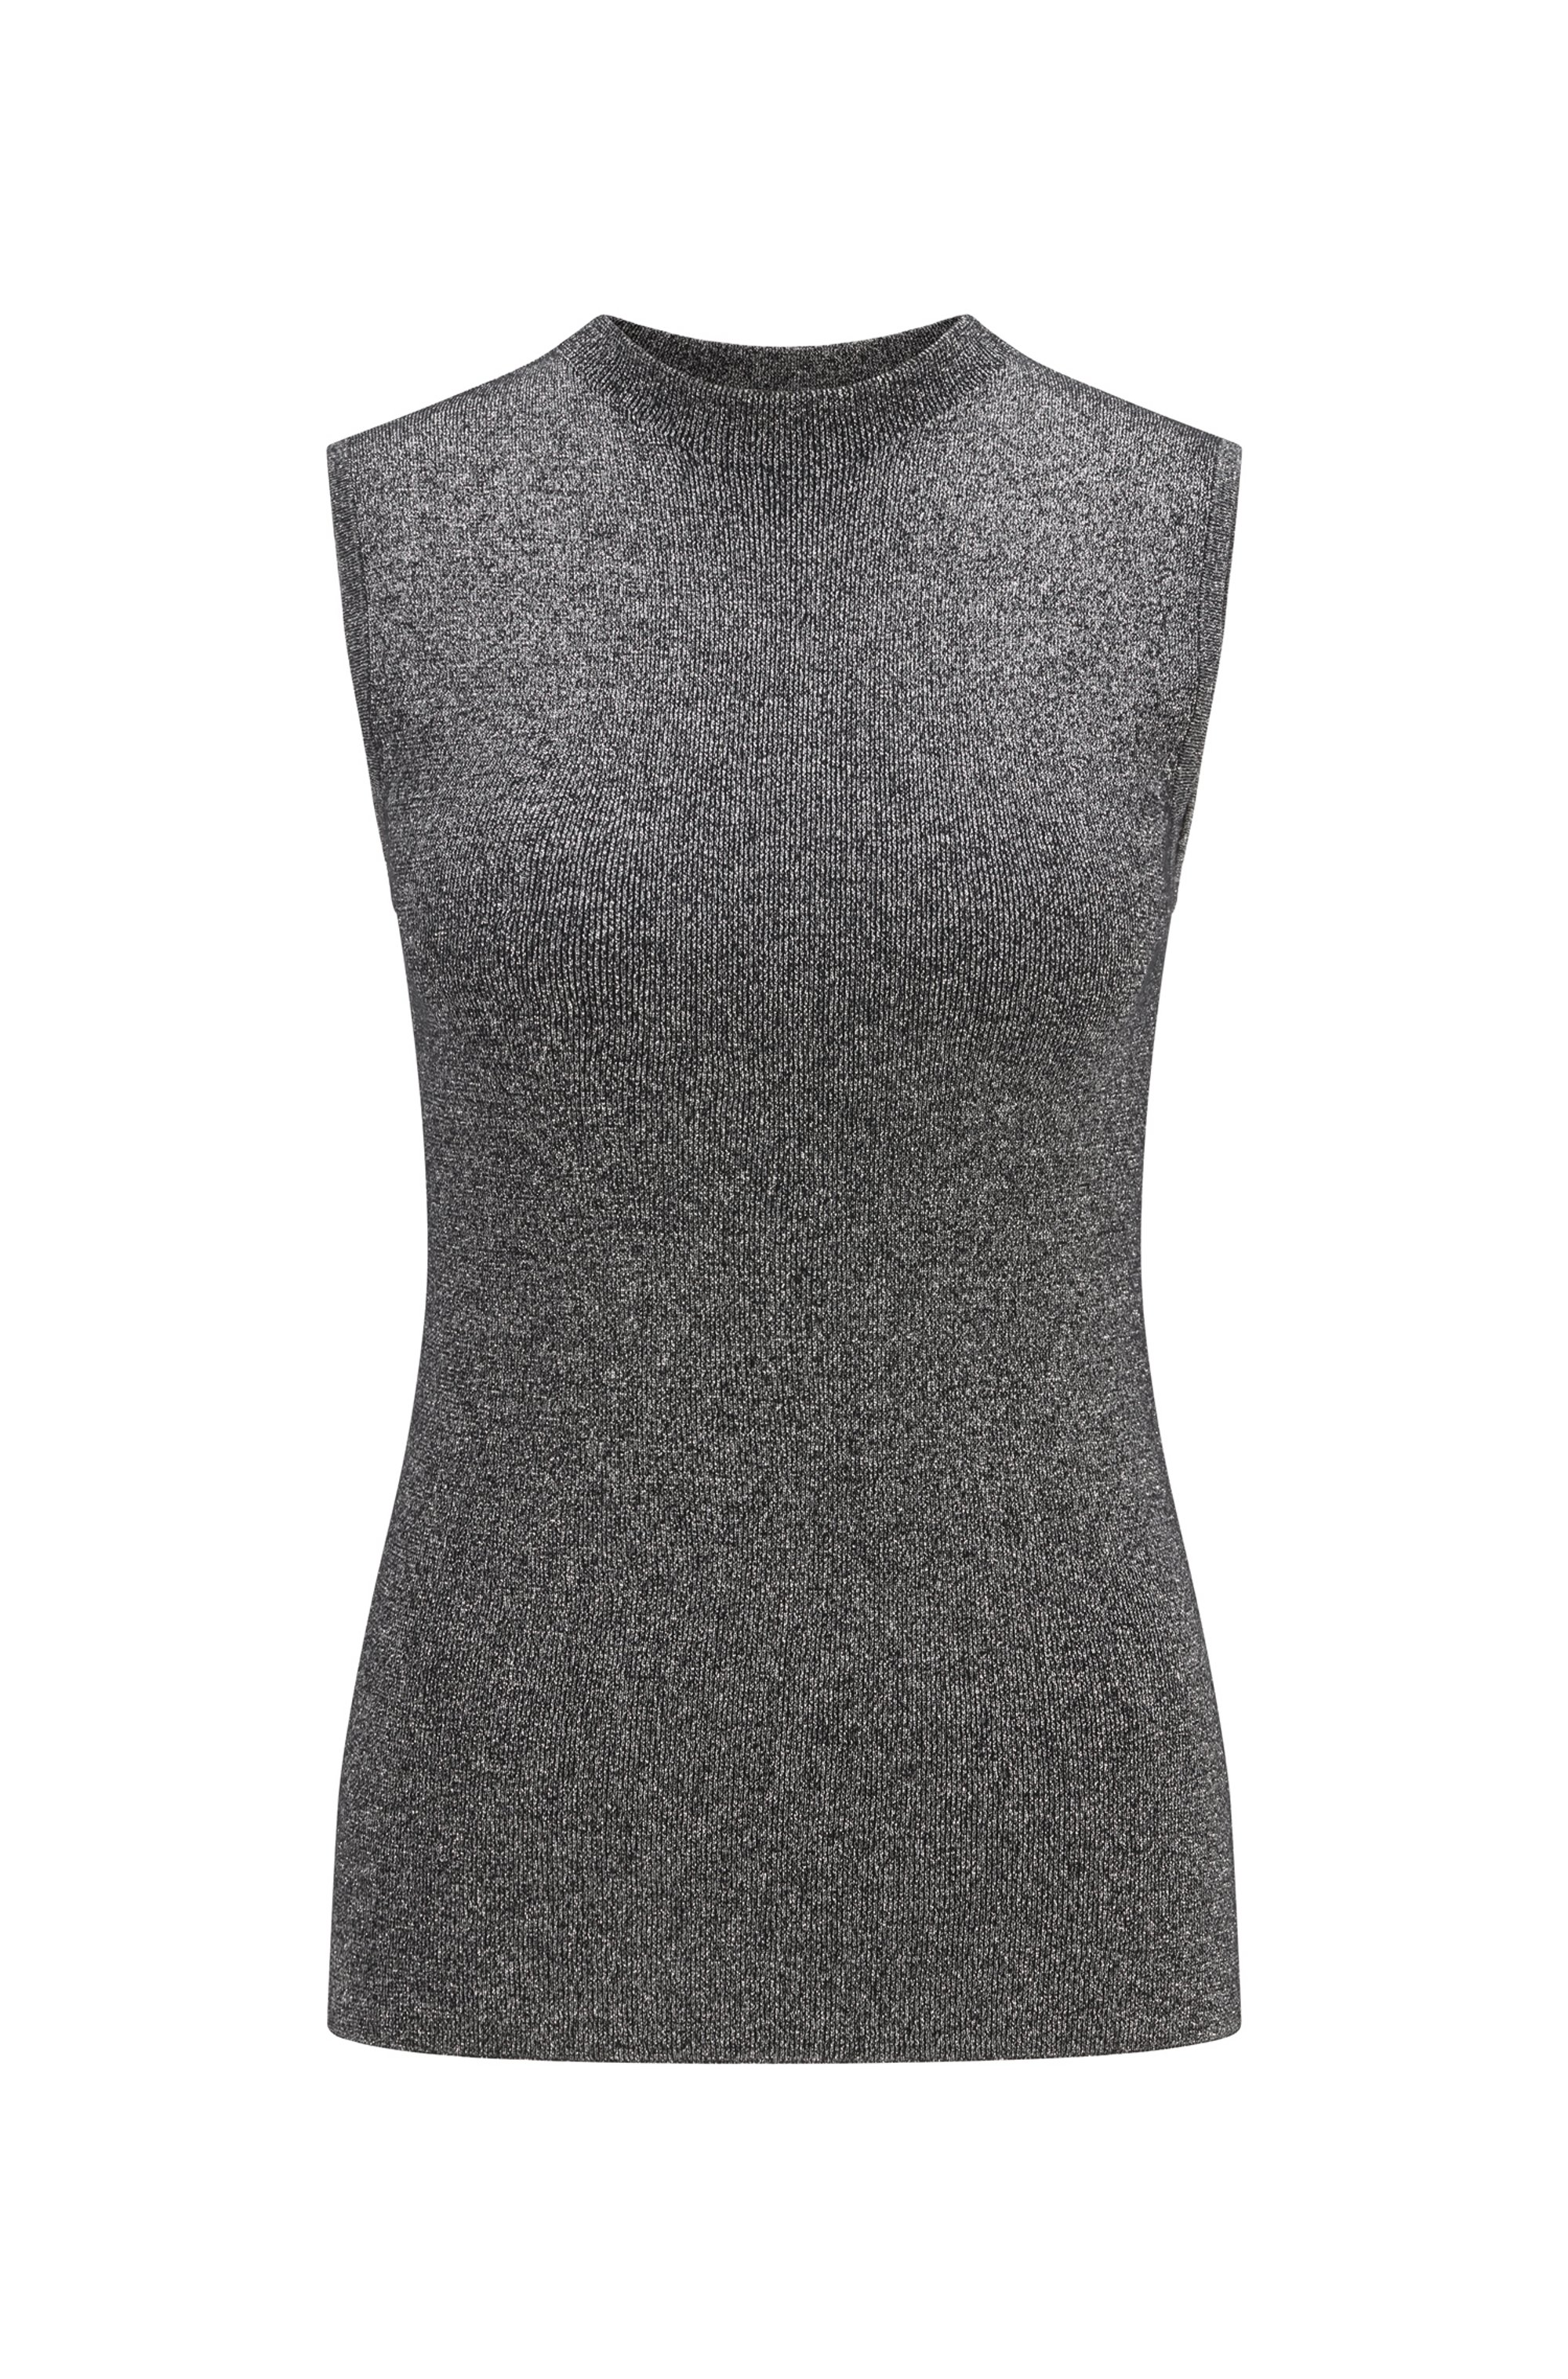 Mock-neck top in a sparkly wool blend, Black